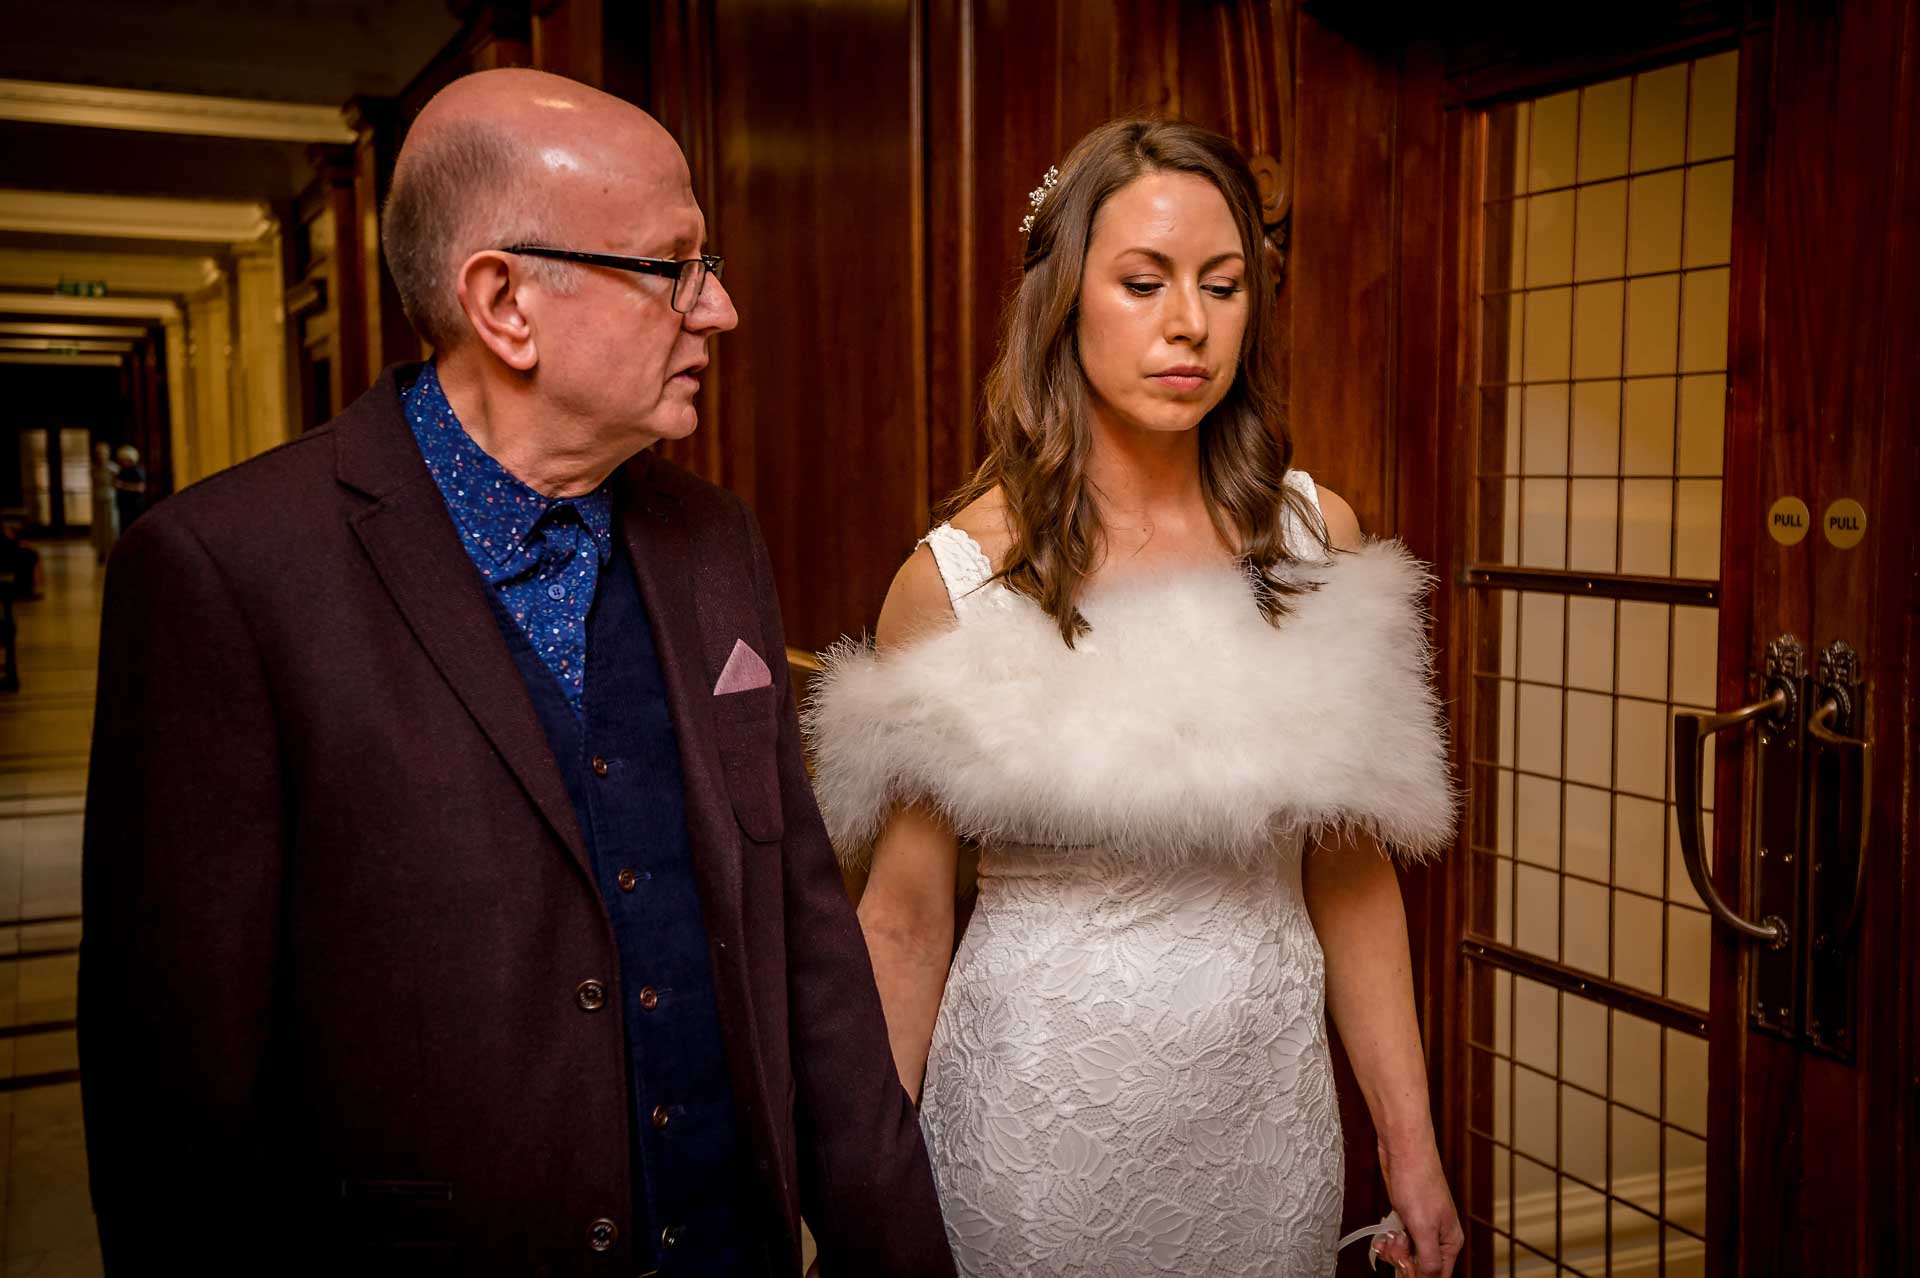 Bride with dad looking thoughtful before wedding ceremony